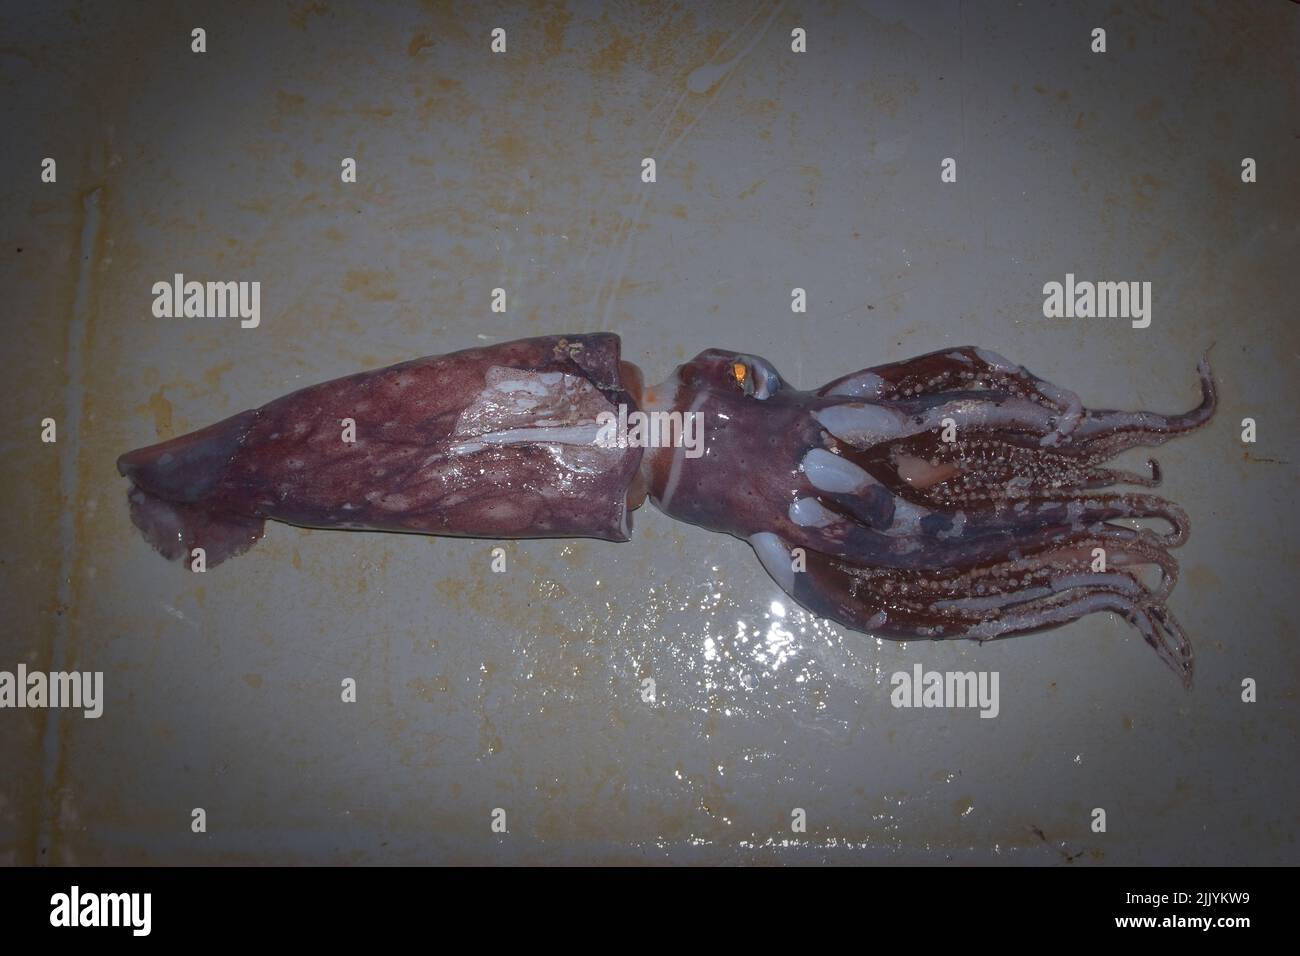 A Look at life in New Zealand: Freshly landed catch (Jewel Squid: Histioteuthis), from a deep-sea trawl. Stock Photo